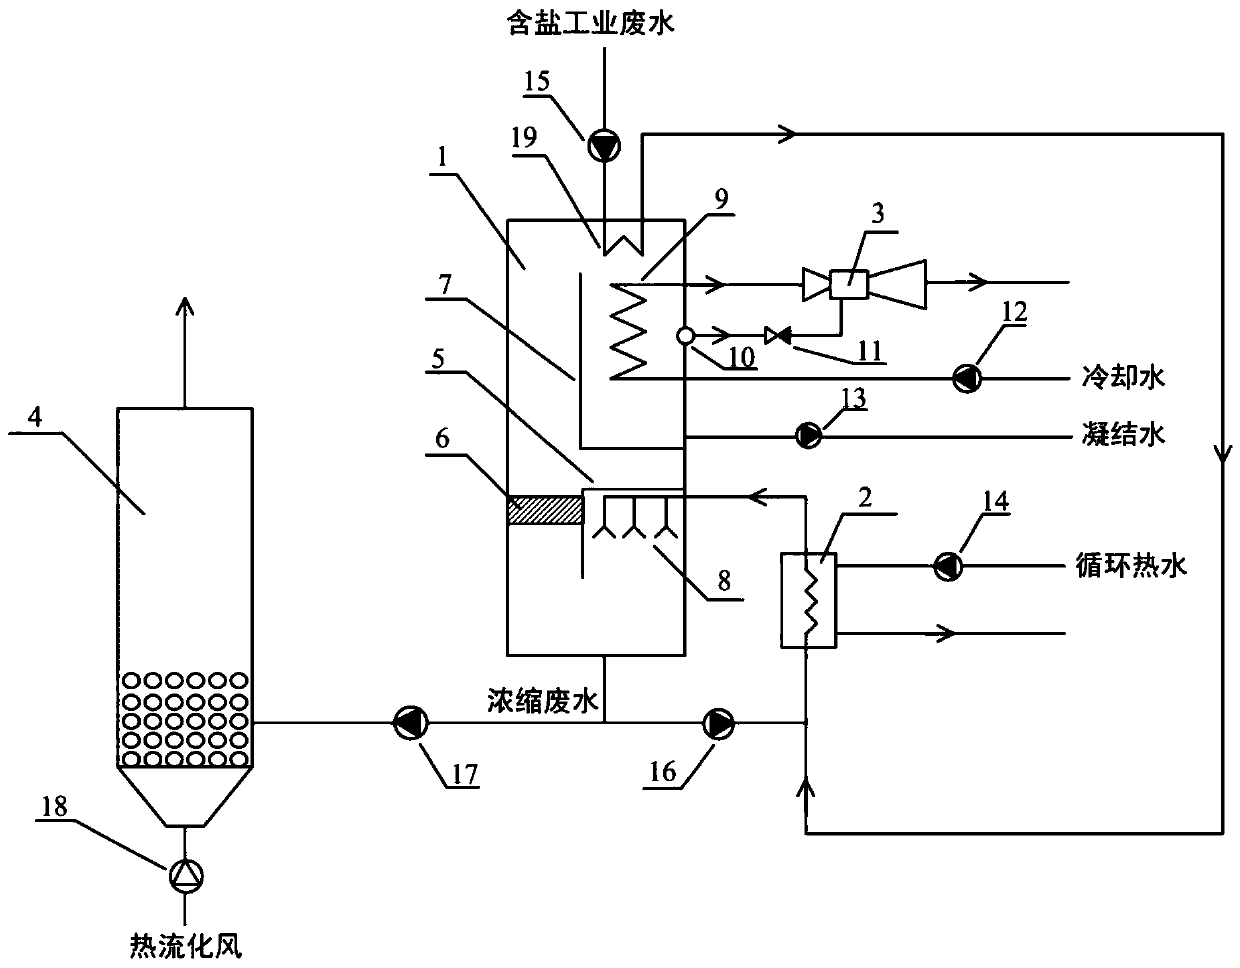 Ultra-low-energy consumption flash evaporation concentration system for zero discharge of desulfurization wastewater and industrial salty wastewater